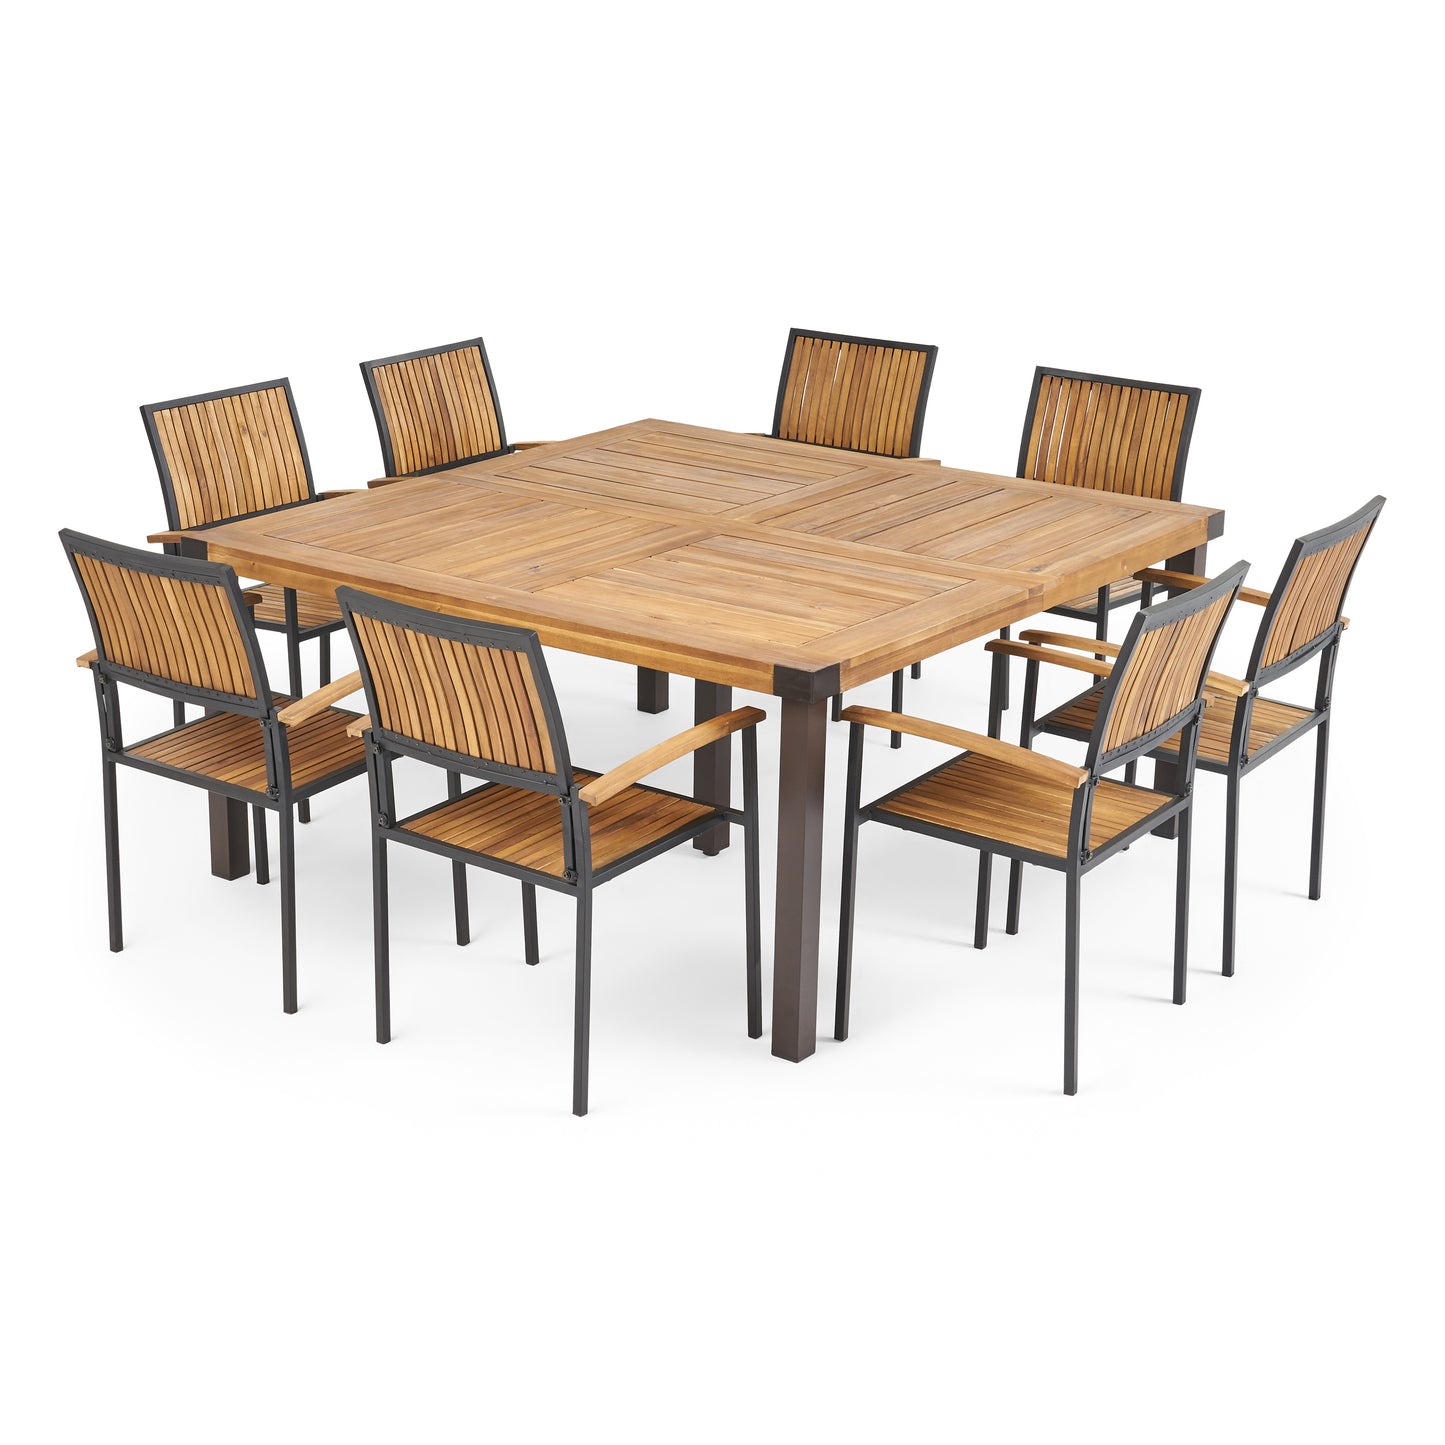 Maggie Outdoor 8 Seater Acacia Wood Dining Set